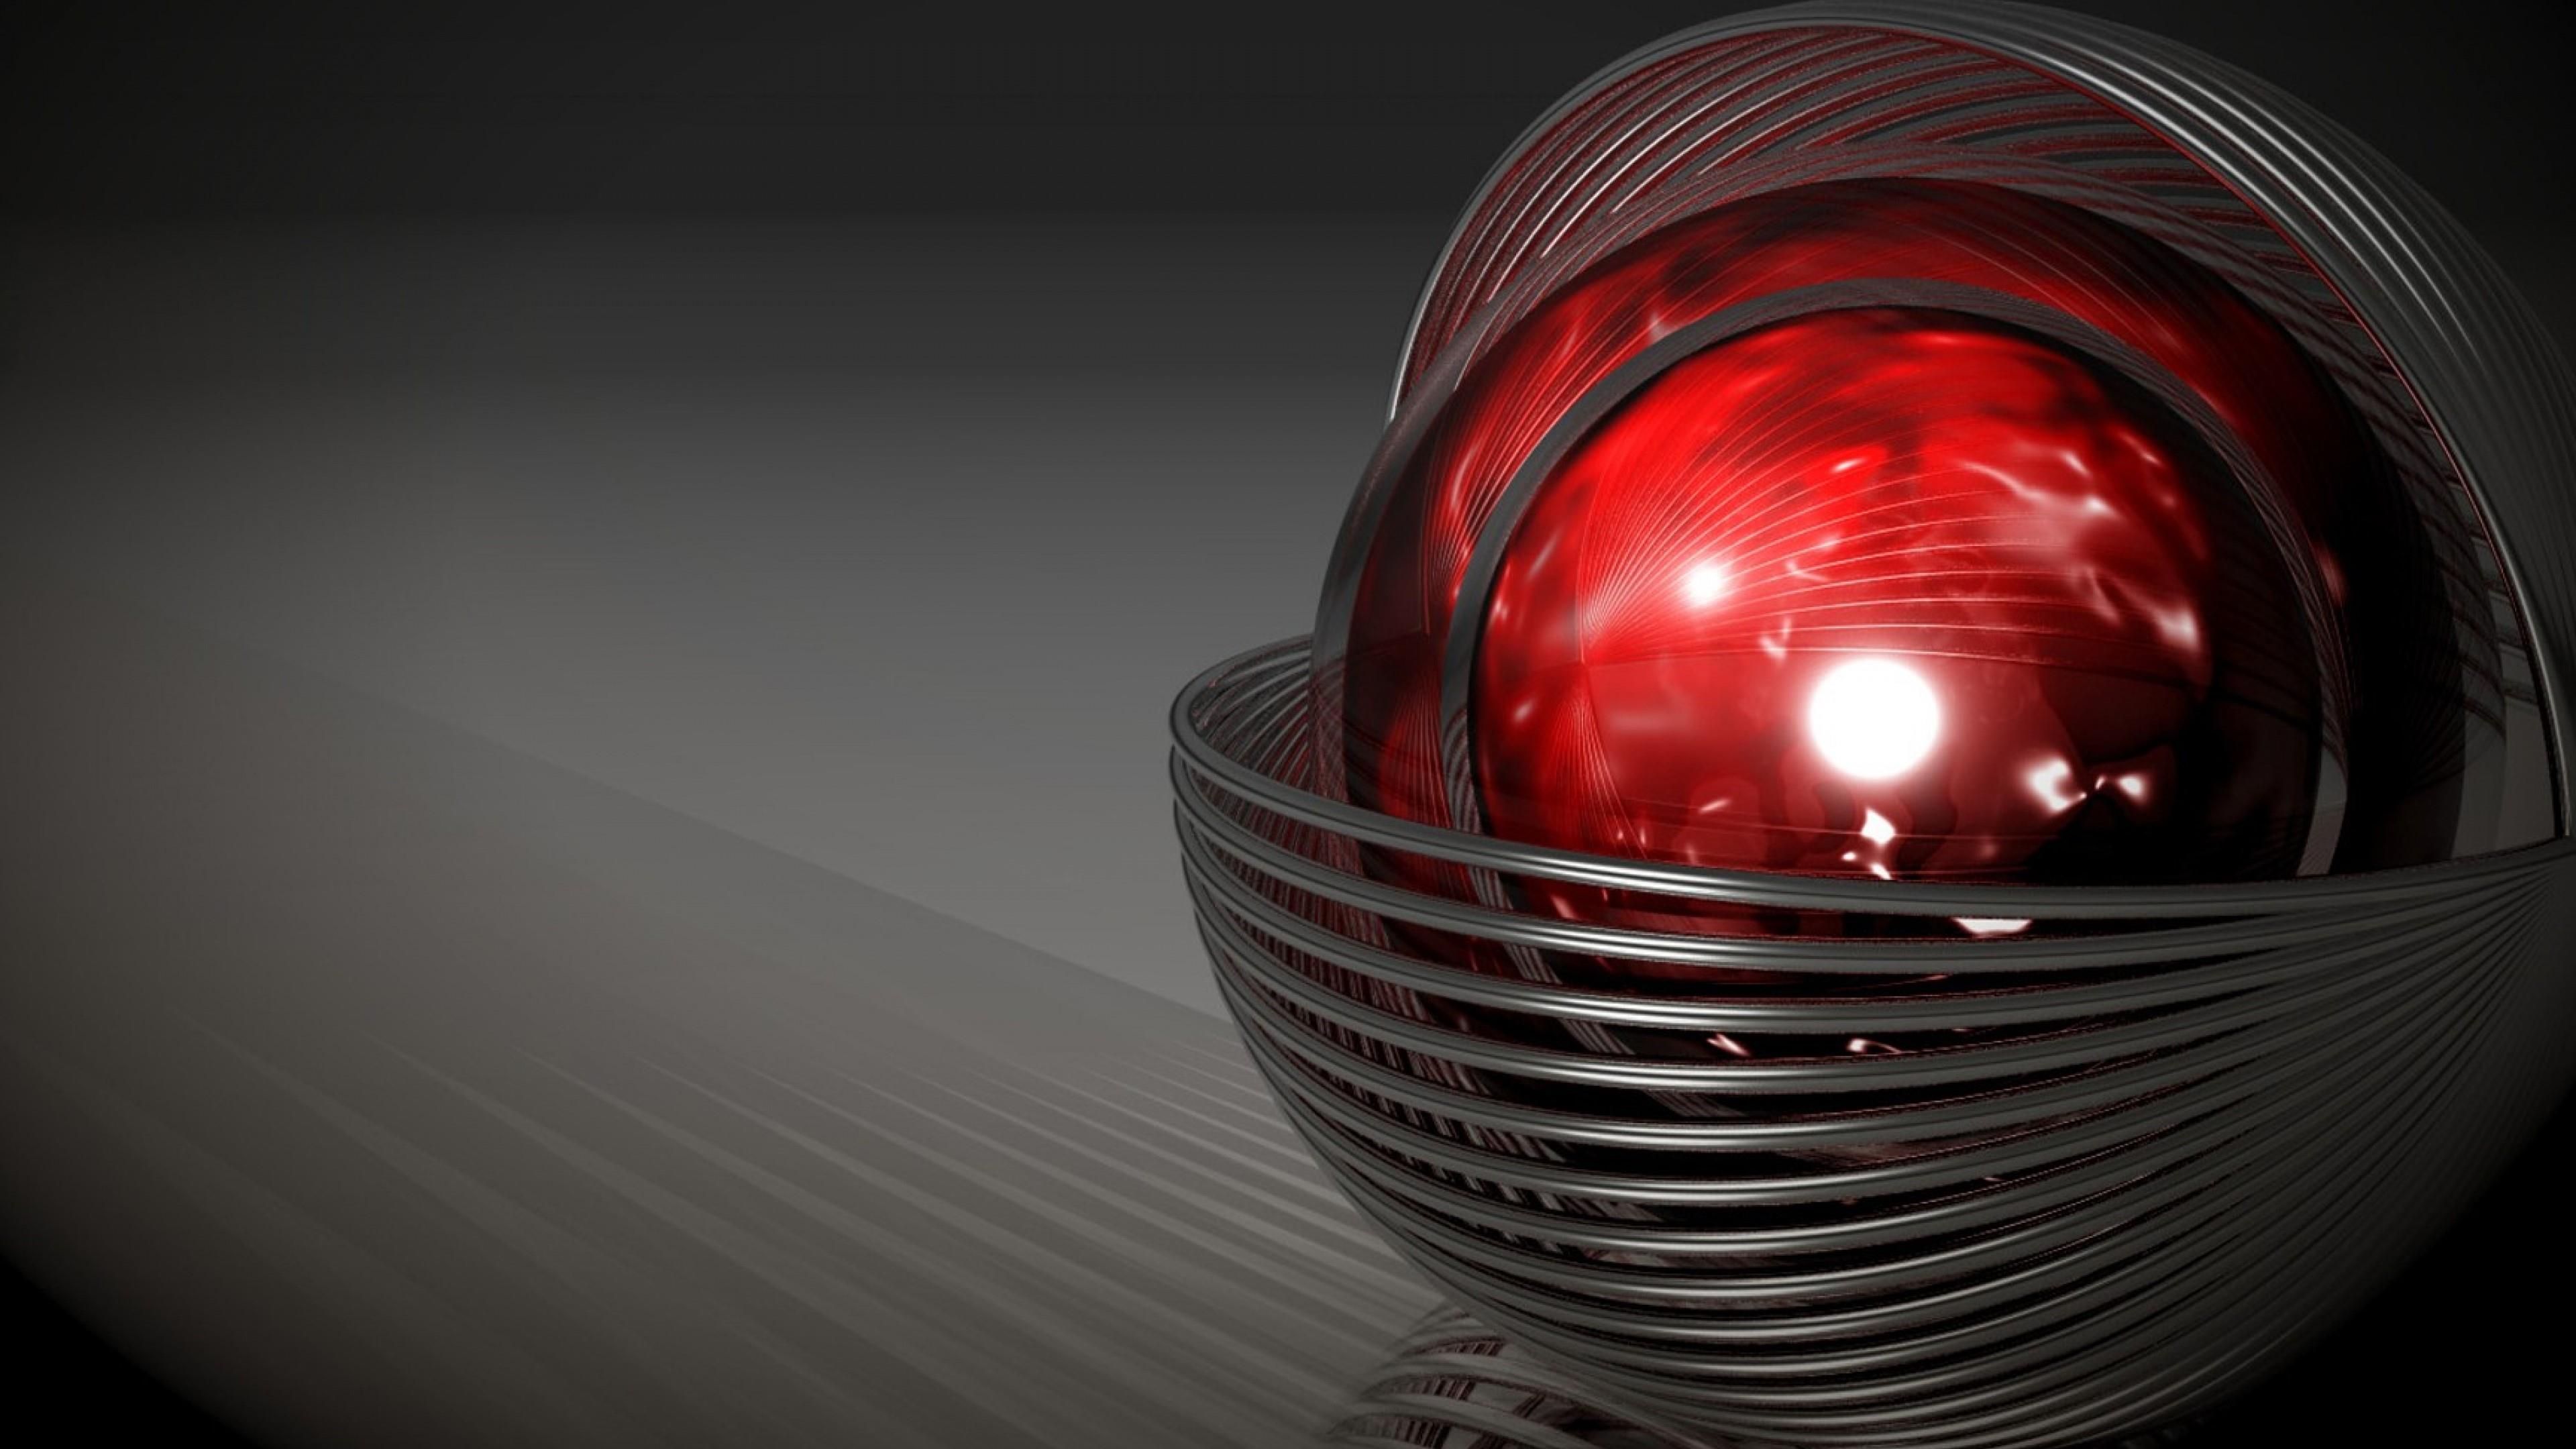 Red and Black Round Light. Wallpaper in 3840x2160 Resolution